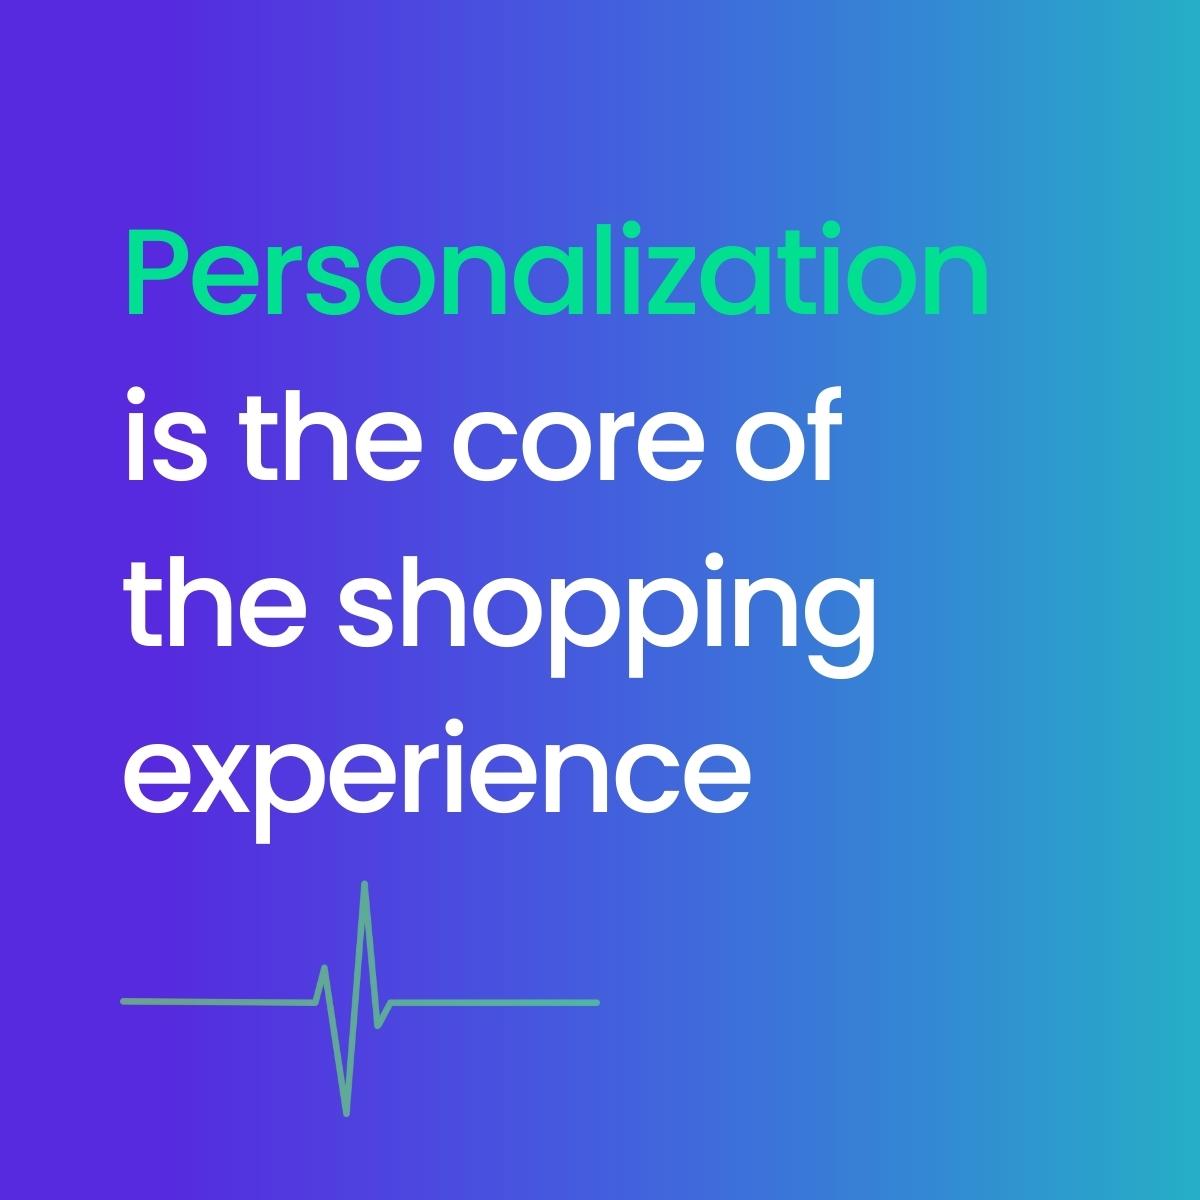 A text that states search personalization is the core of digital transformation in eCommerce